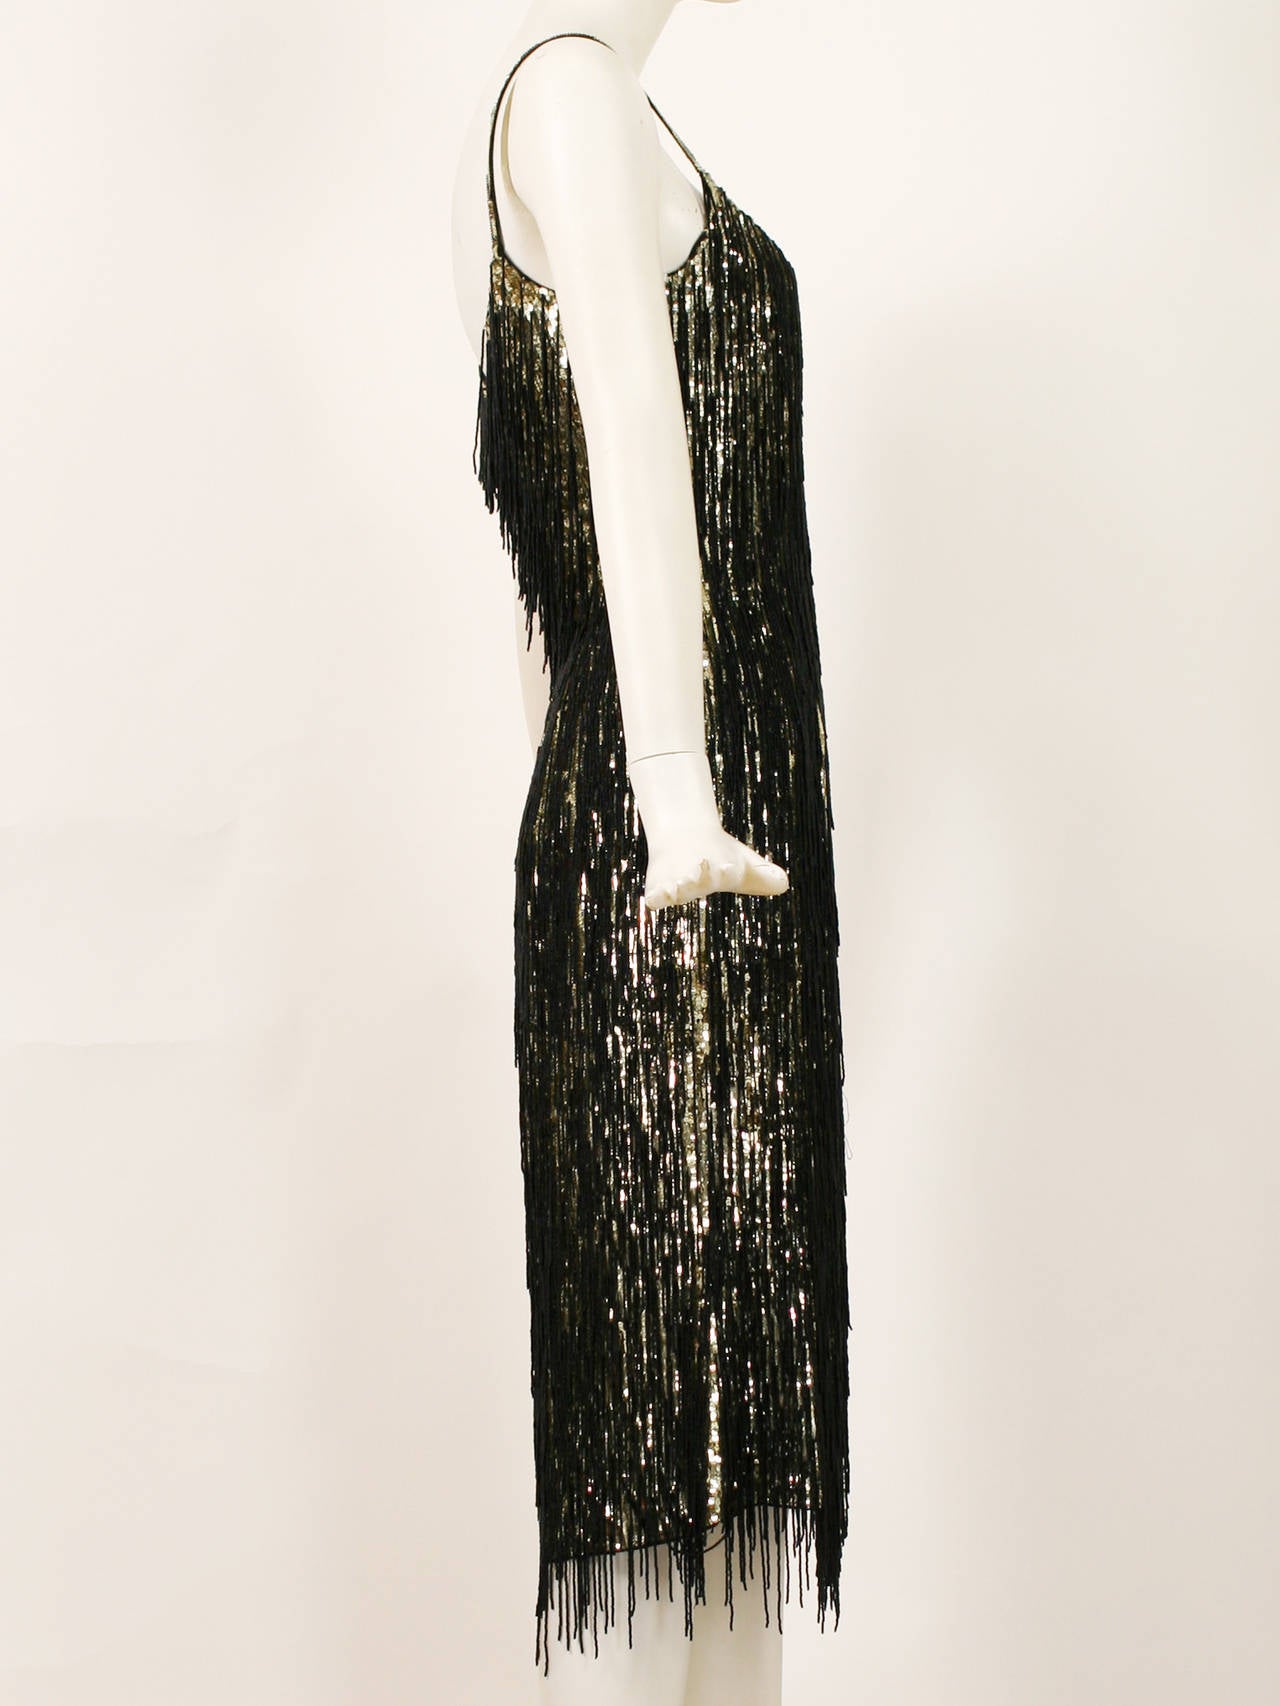 Magnificent Gold and Black beaded Fringe Dress by Escada. 
This dress is made of gold sequins with black fringe made of tiny beads. All hand worked. This is a truly and amazing dress. Excellent condition. 
Size 4
Bust- 34-35